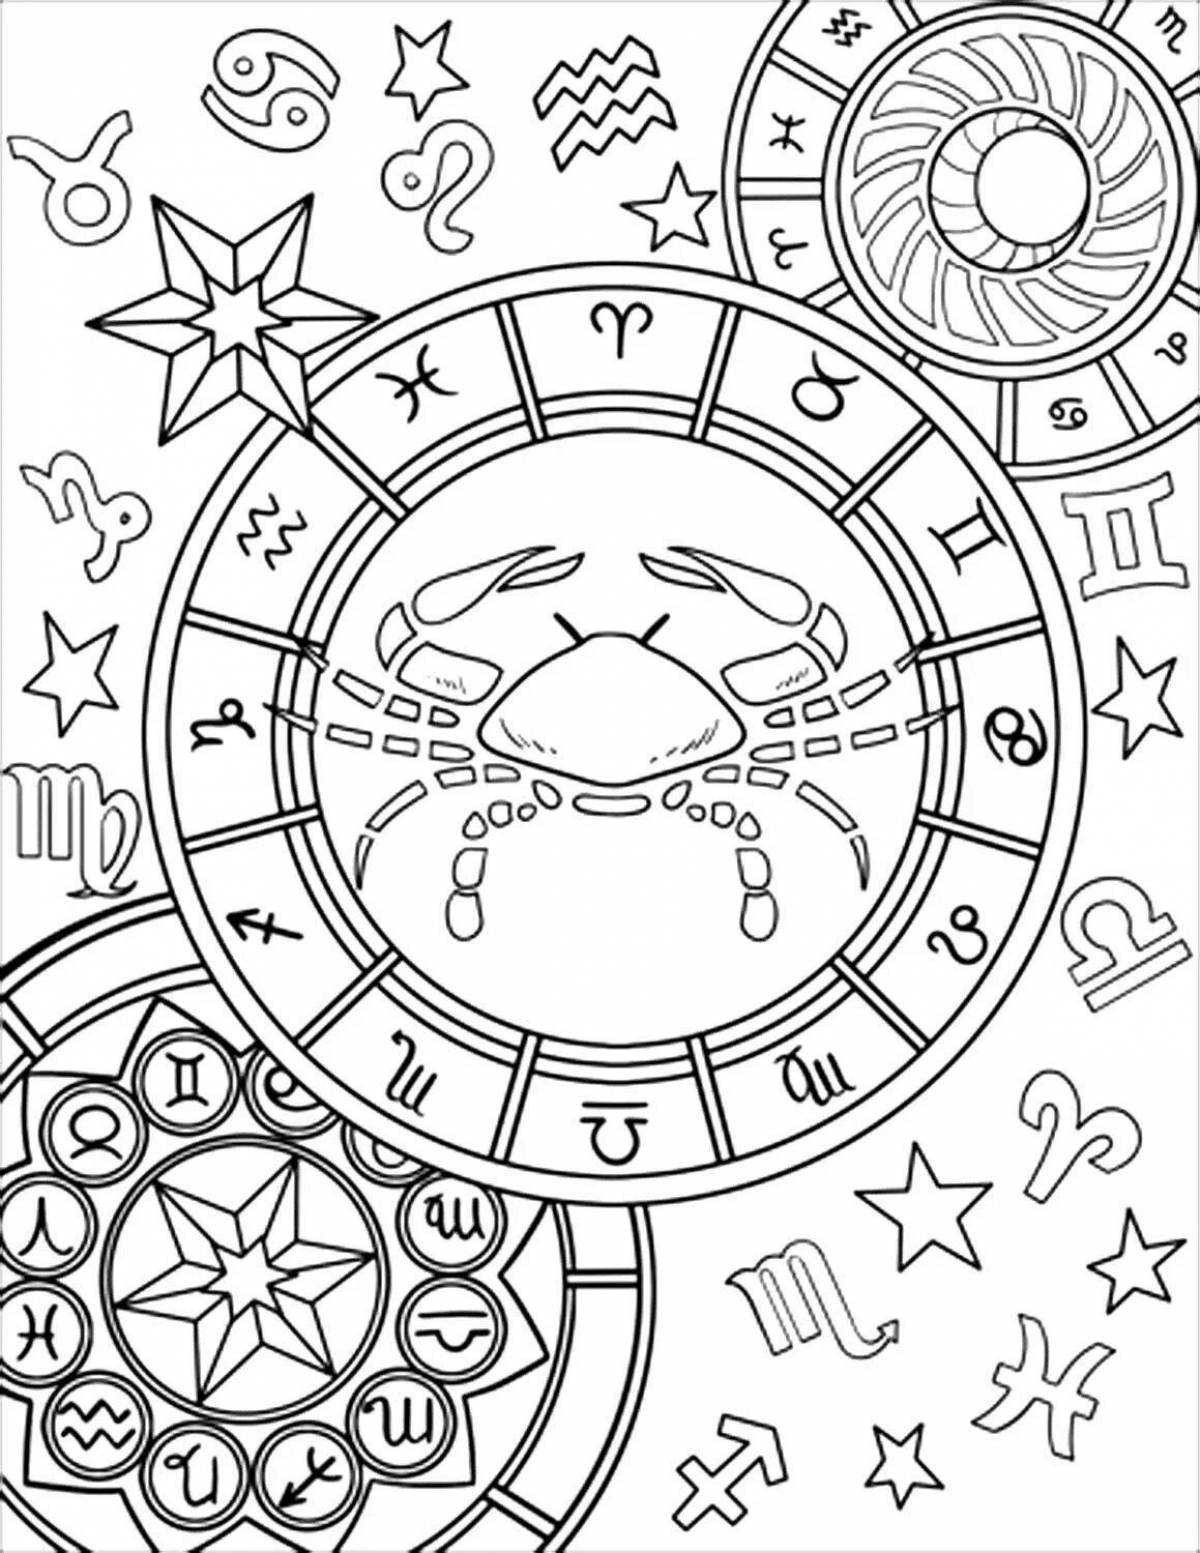 Colorful cancer coloring page